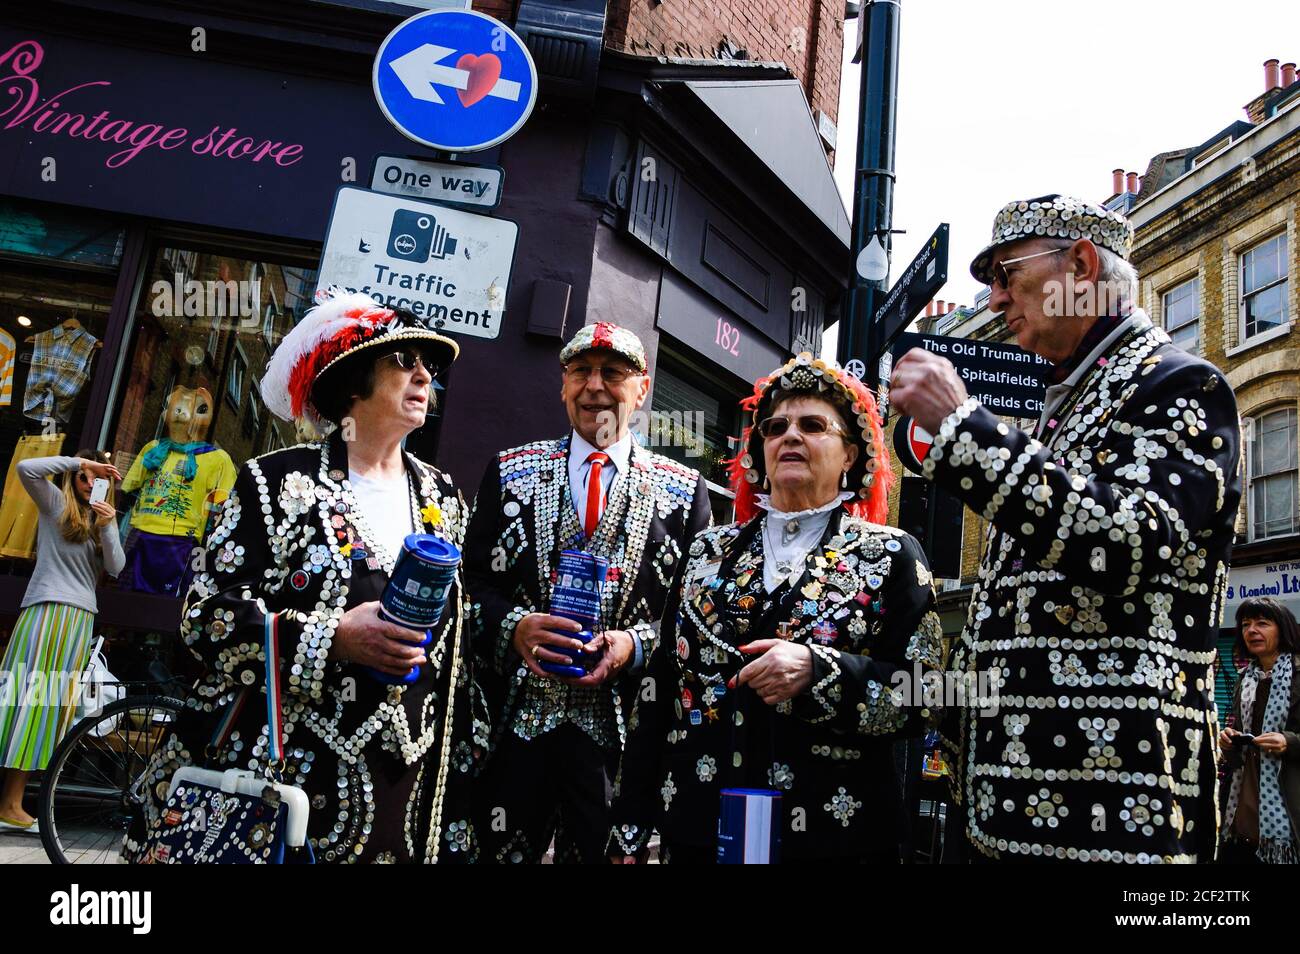 LONDON, ENGLAND, UK - MAY 4, 2014: Pearly Kings and Queens raise funds for charity near Cheshire Street and Brick Lane. Stock Photo